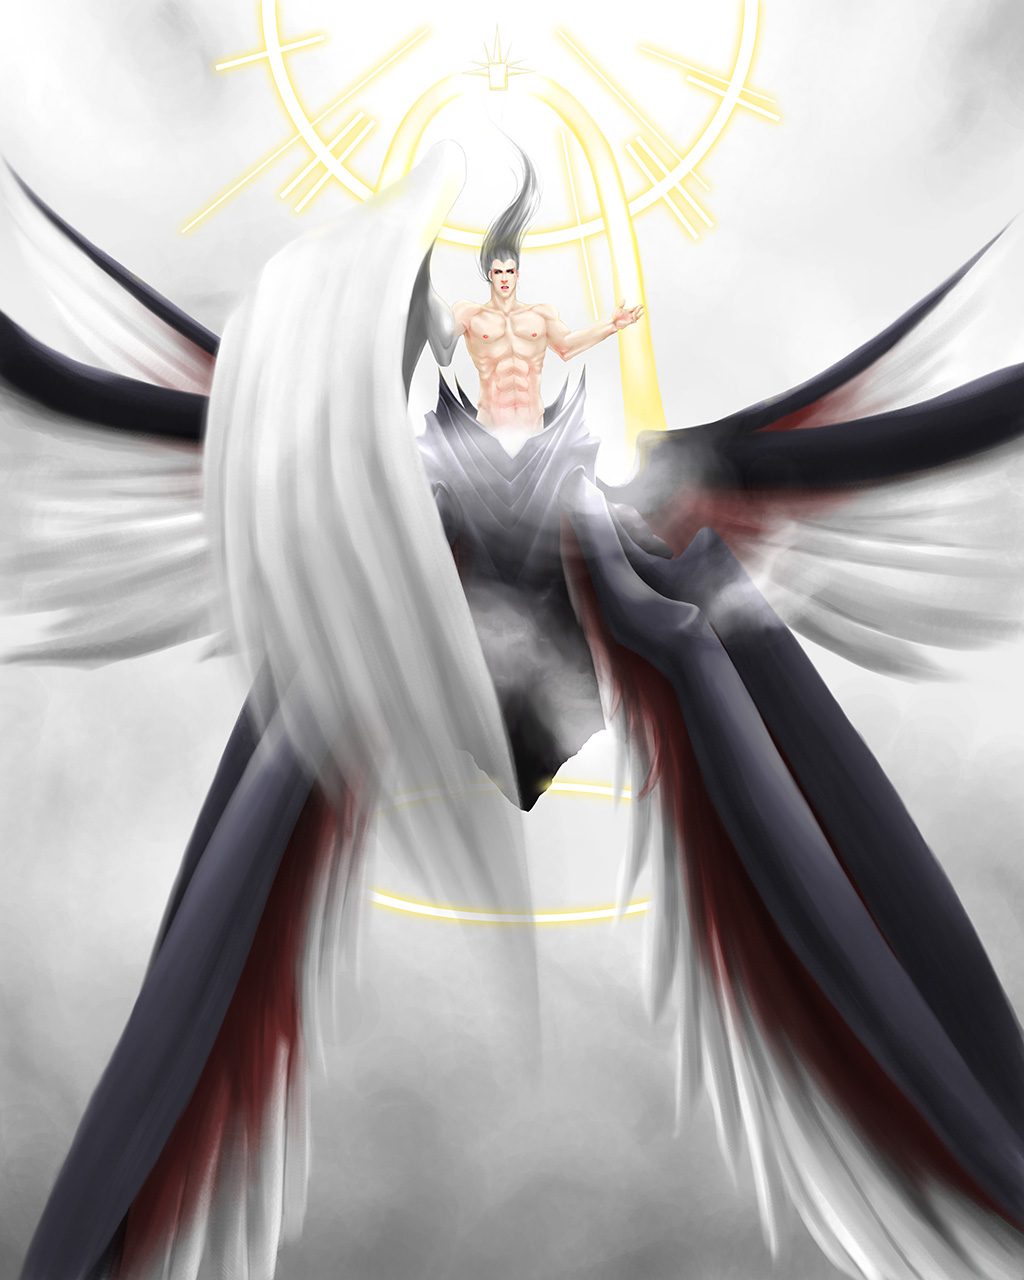 The One Winged Angel by AngelusMortis